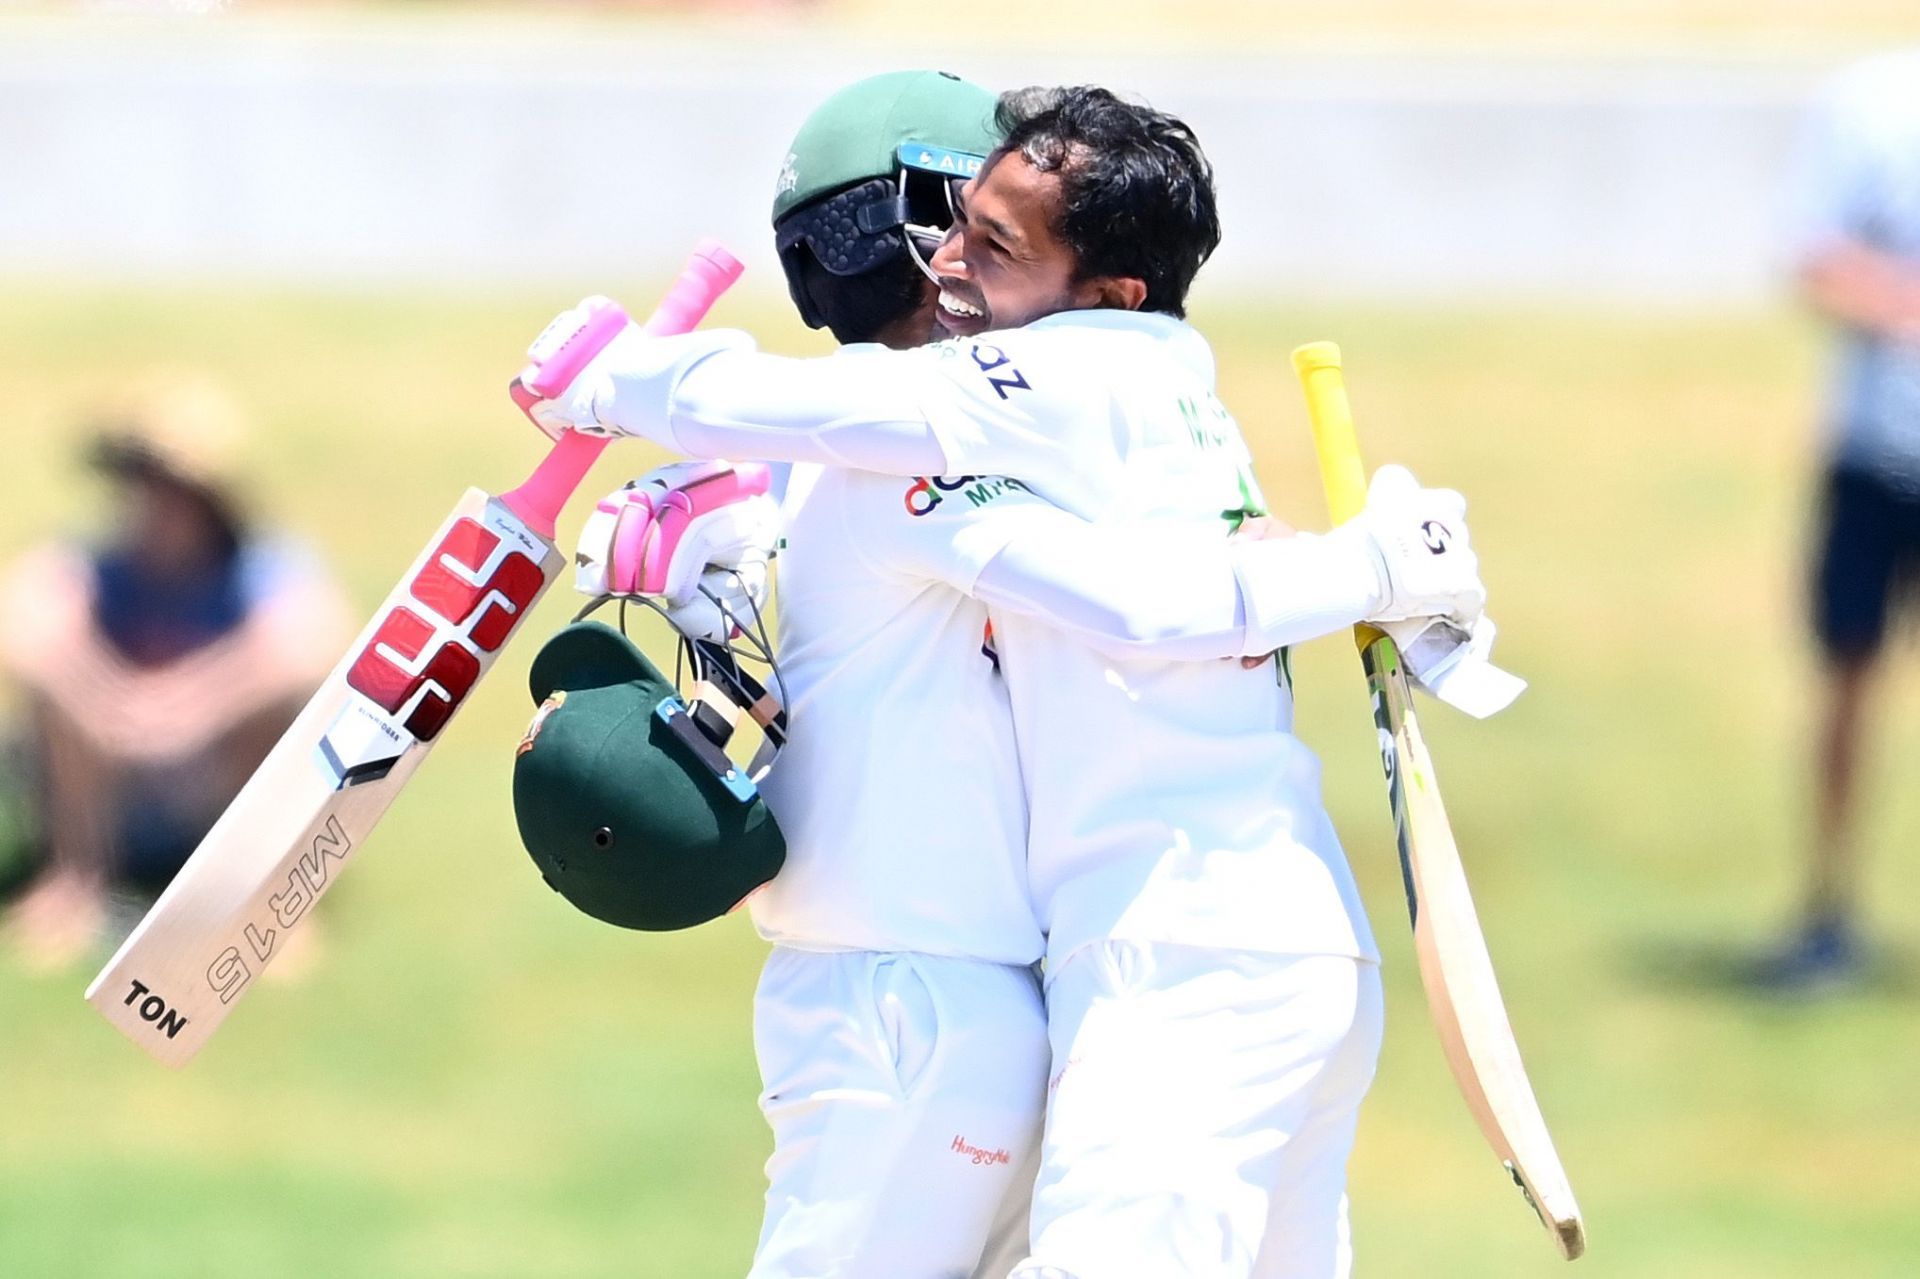 Mominul Haque and Mushfiqur Rahim celebrate an unforgettable day in Bangladesh&rsquo;s cricket history -winning an international match in New Zealand for the first time. Pic: Getty Images